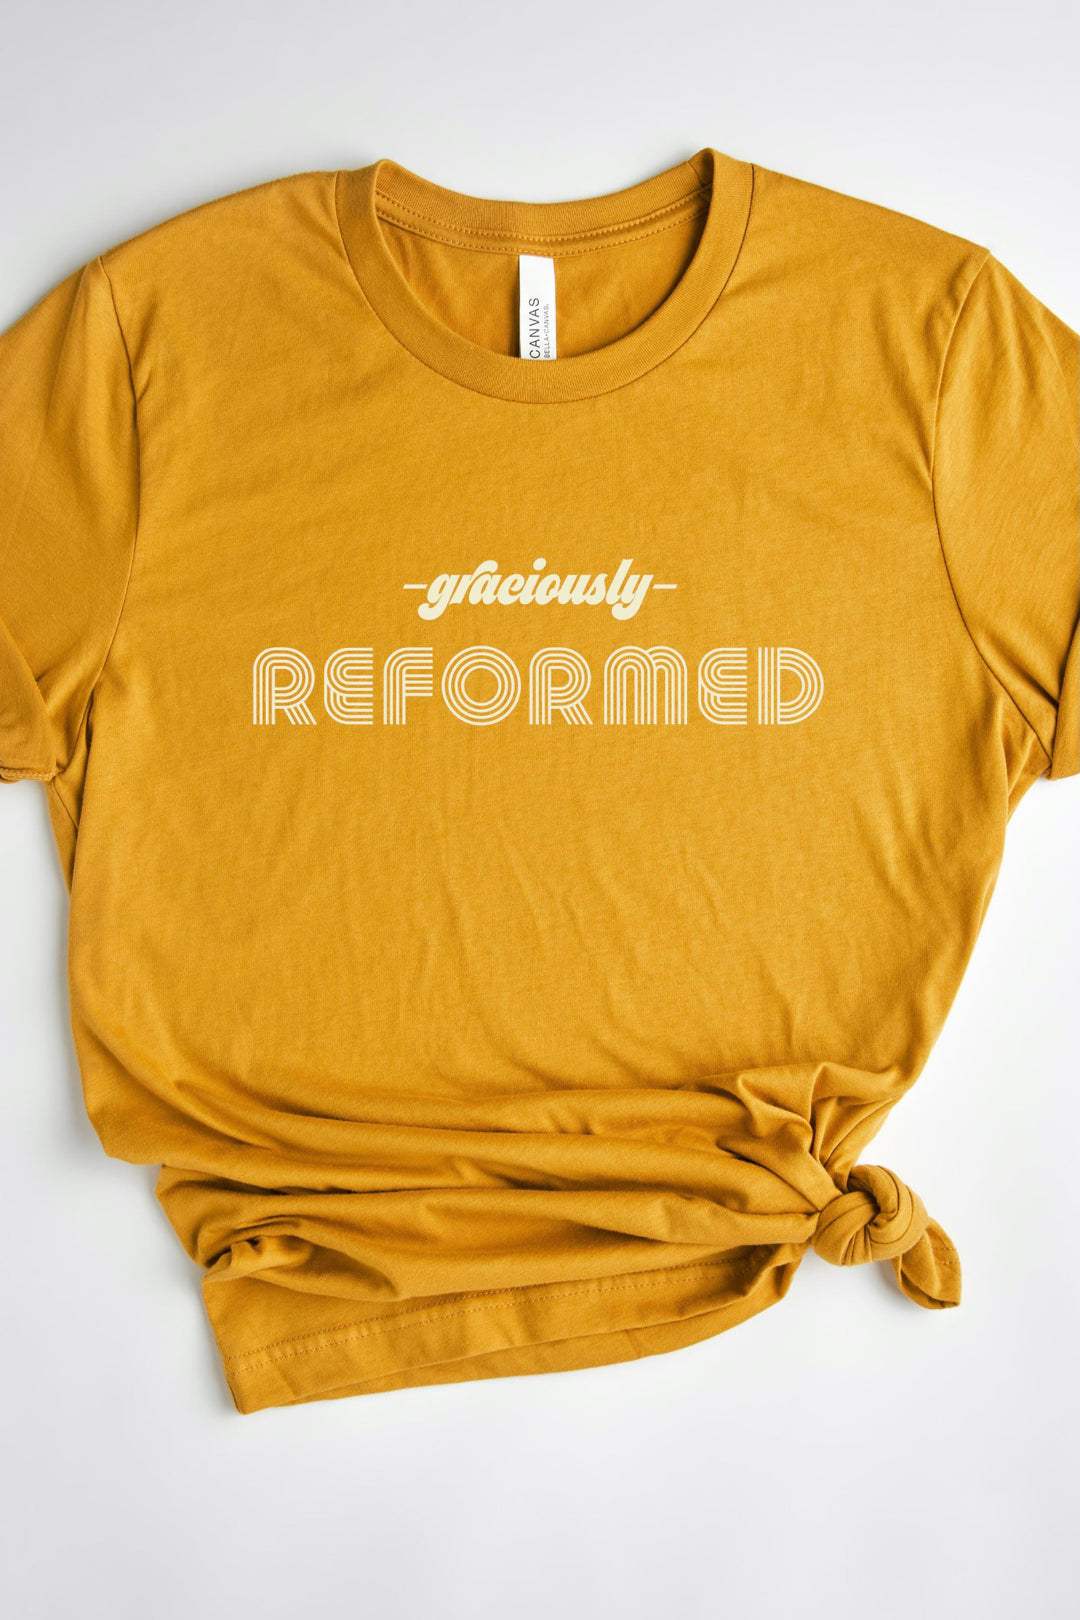 Graciously Reformed Tee